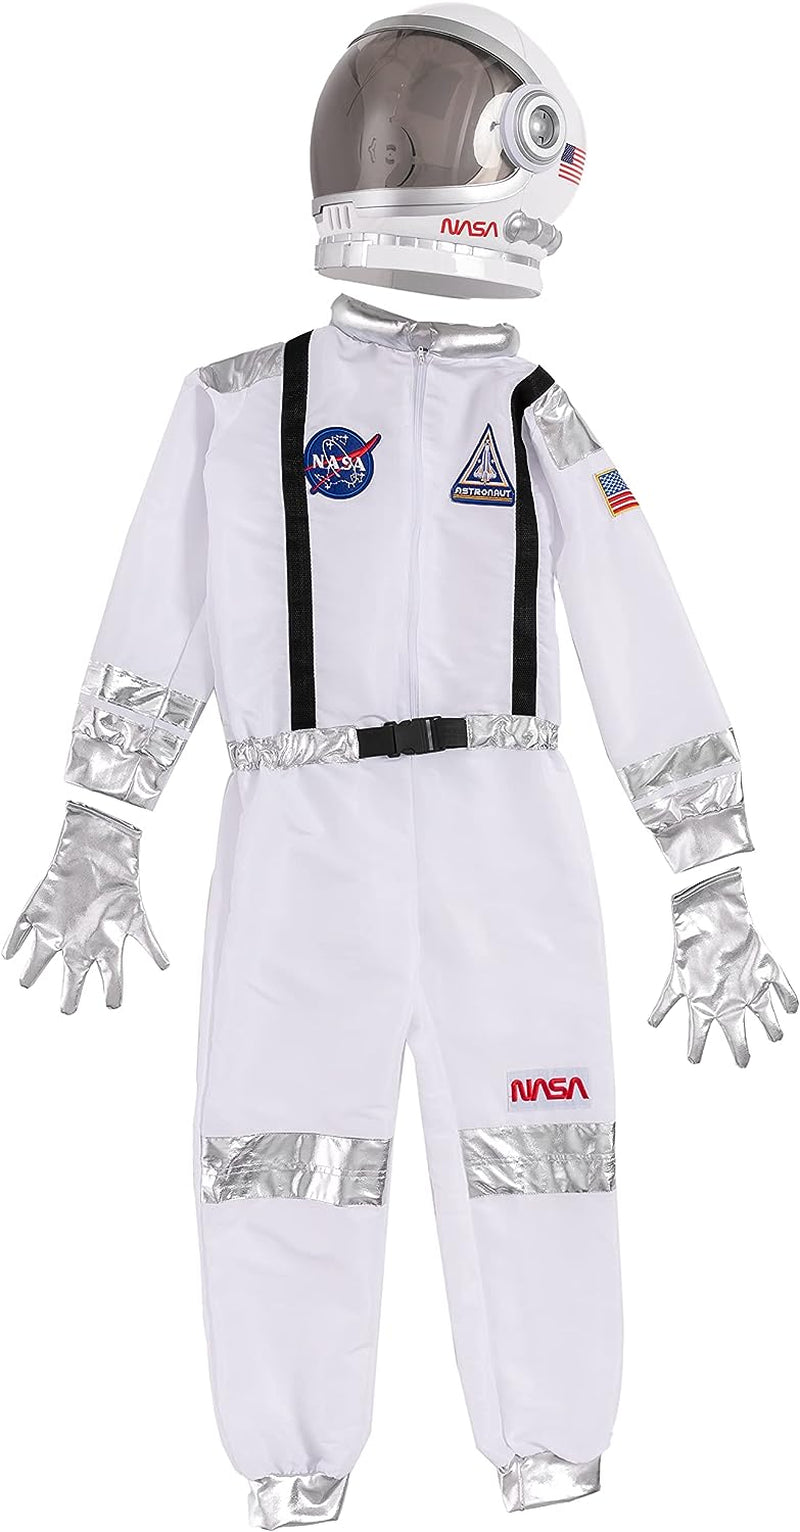 Spooktacular Creations Halloween Child Unisex Astronaut Costume with Silver Stripes for Party Favors (Medium (8-10Yr))